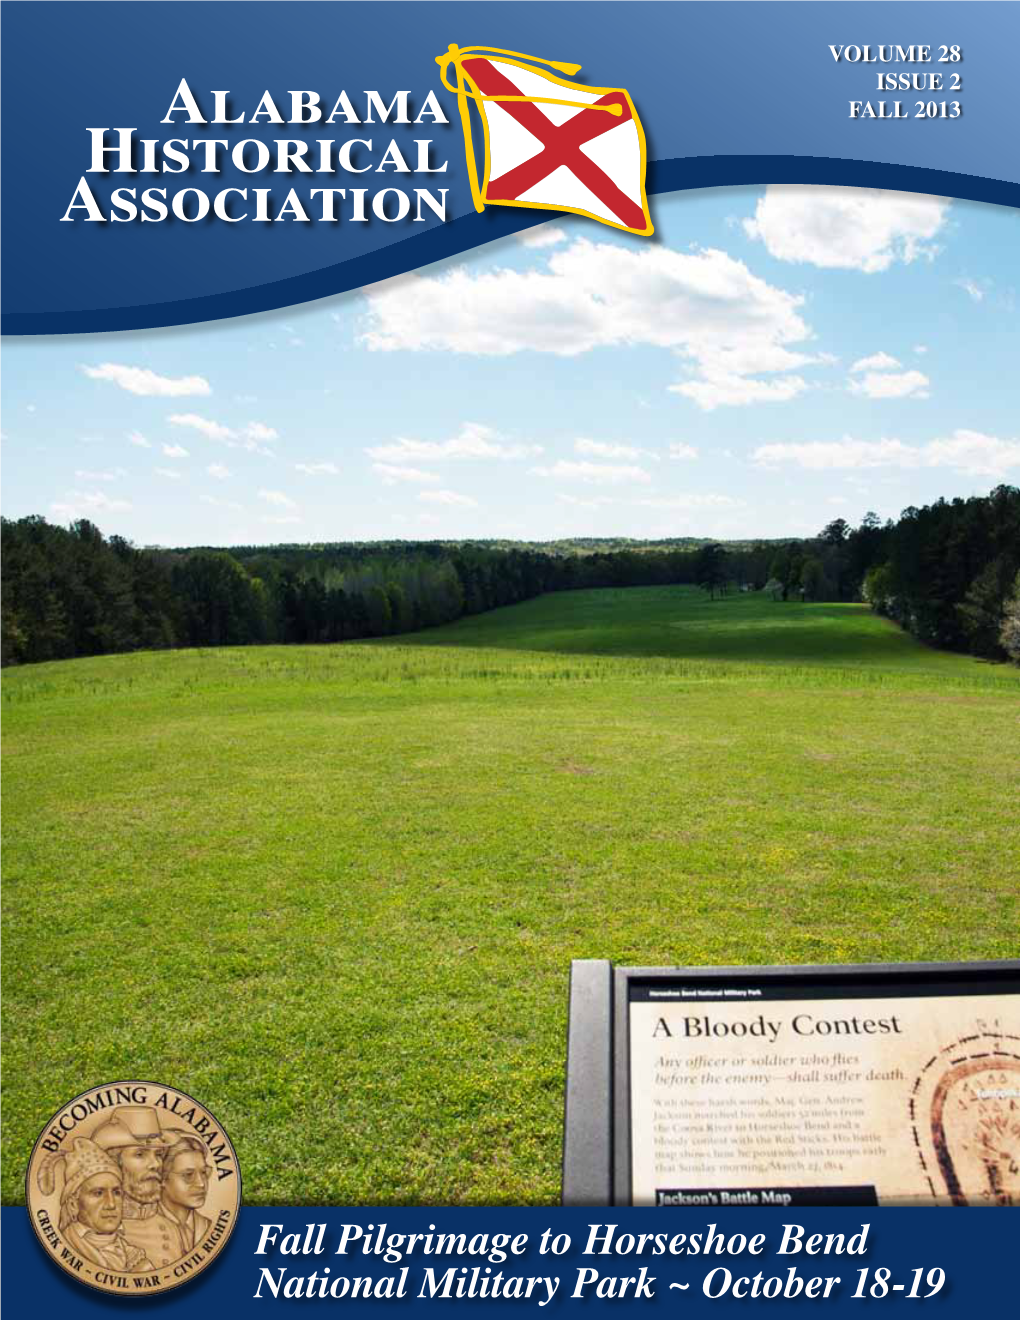 Alabama Historical Association Is the Oldest Statewide Historical Society in Alabama